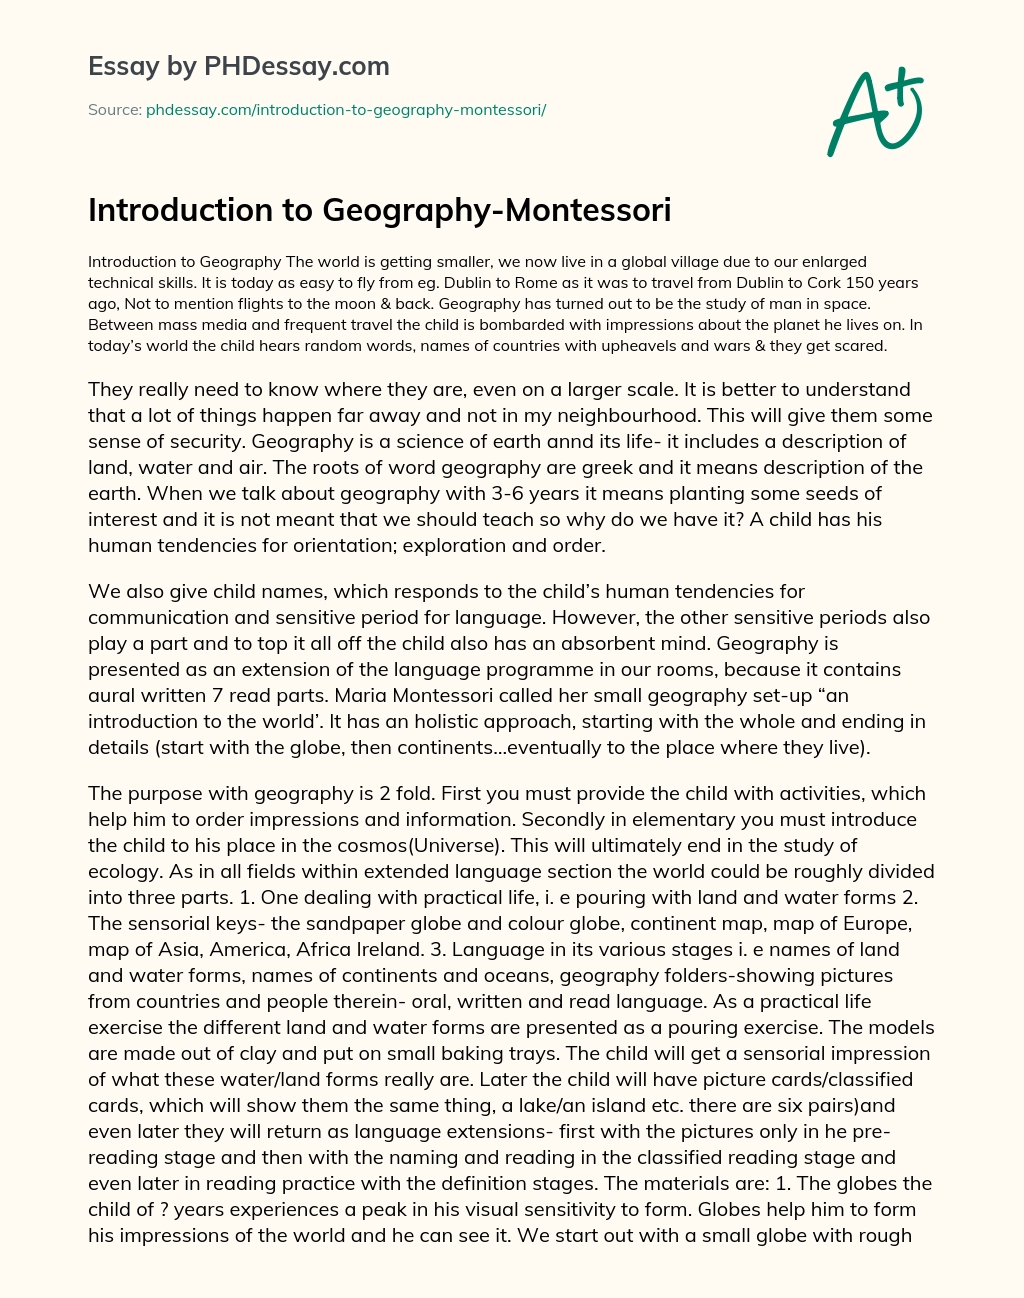 Introduction to Geography-Montessori essay